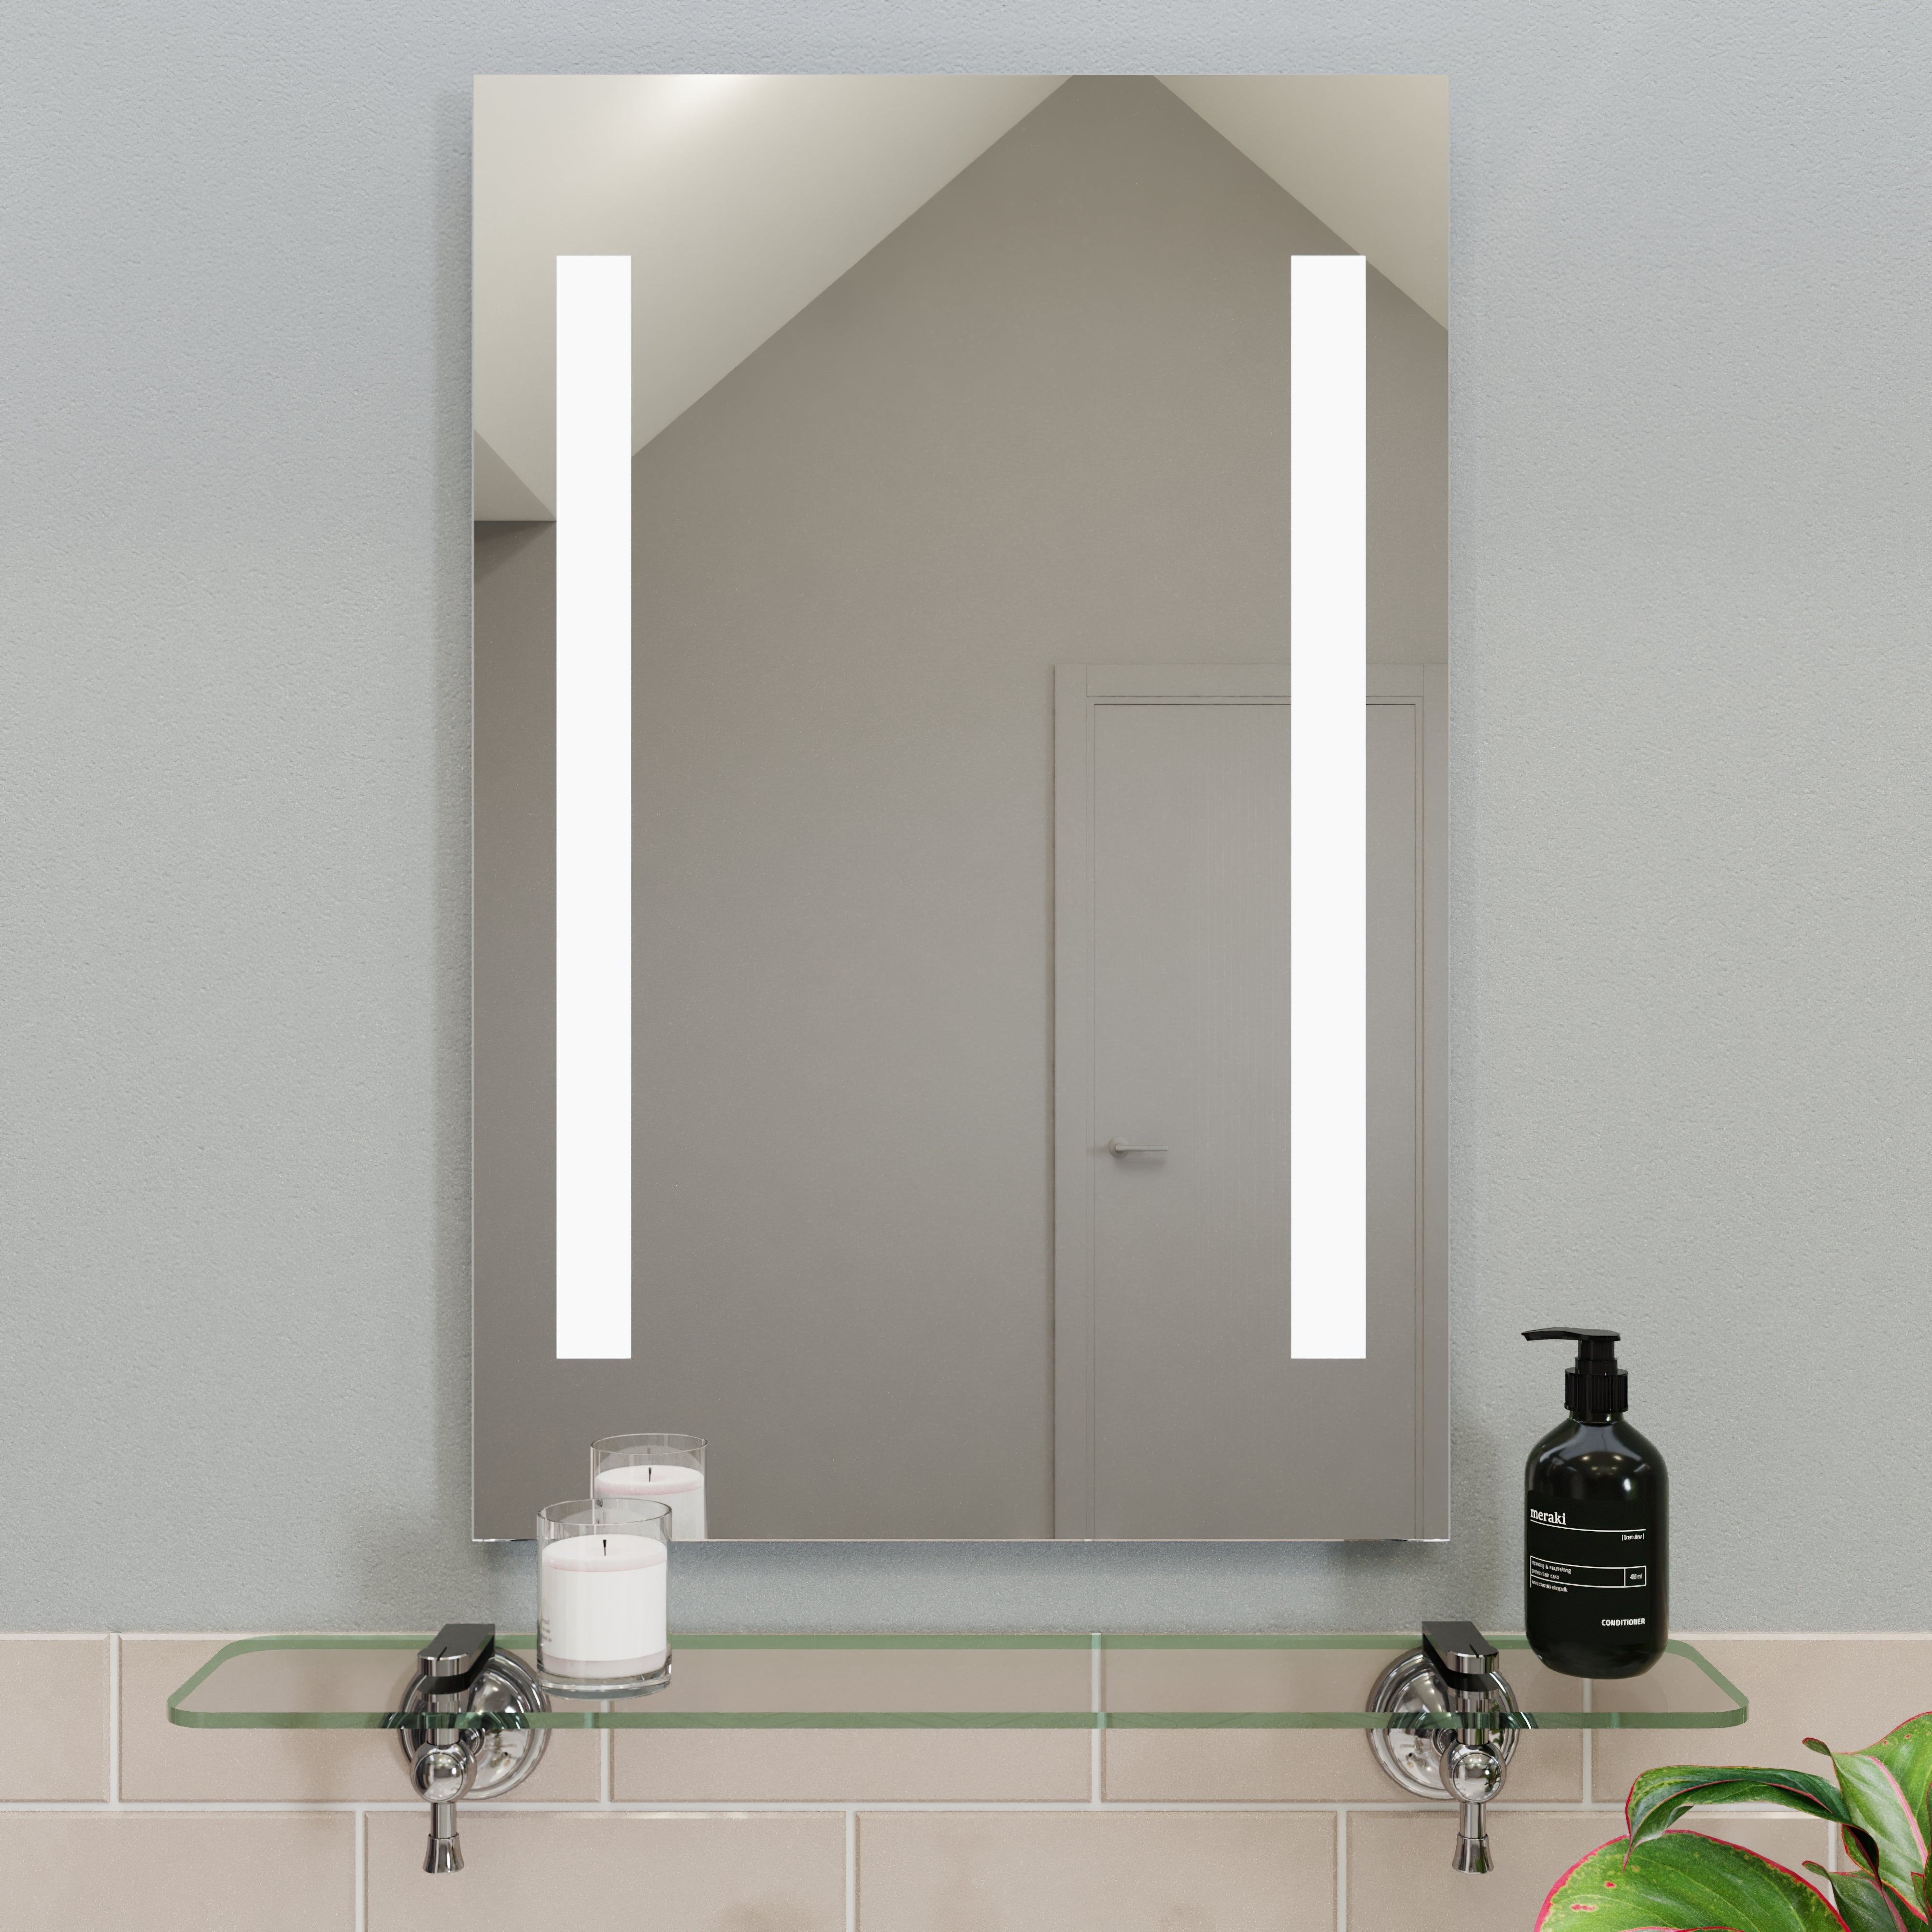 Photos - Wall Mirror Clear Thorton Battery Operated Light-Up Mirror, 40x60cm 